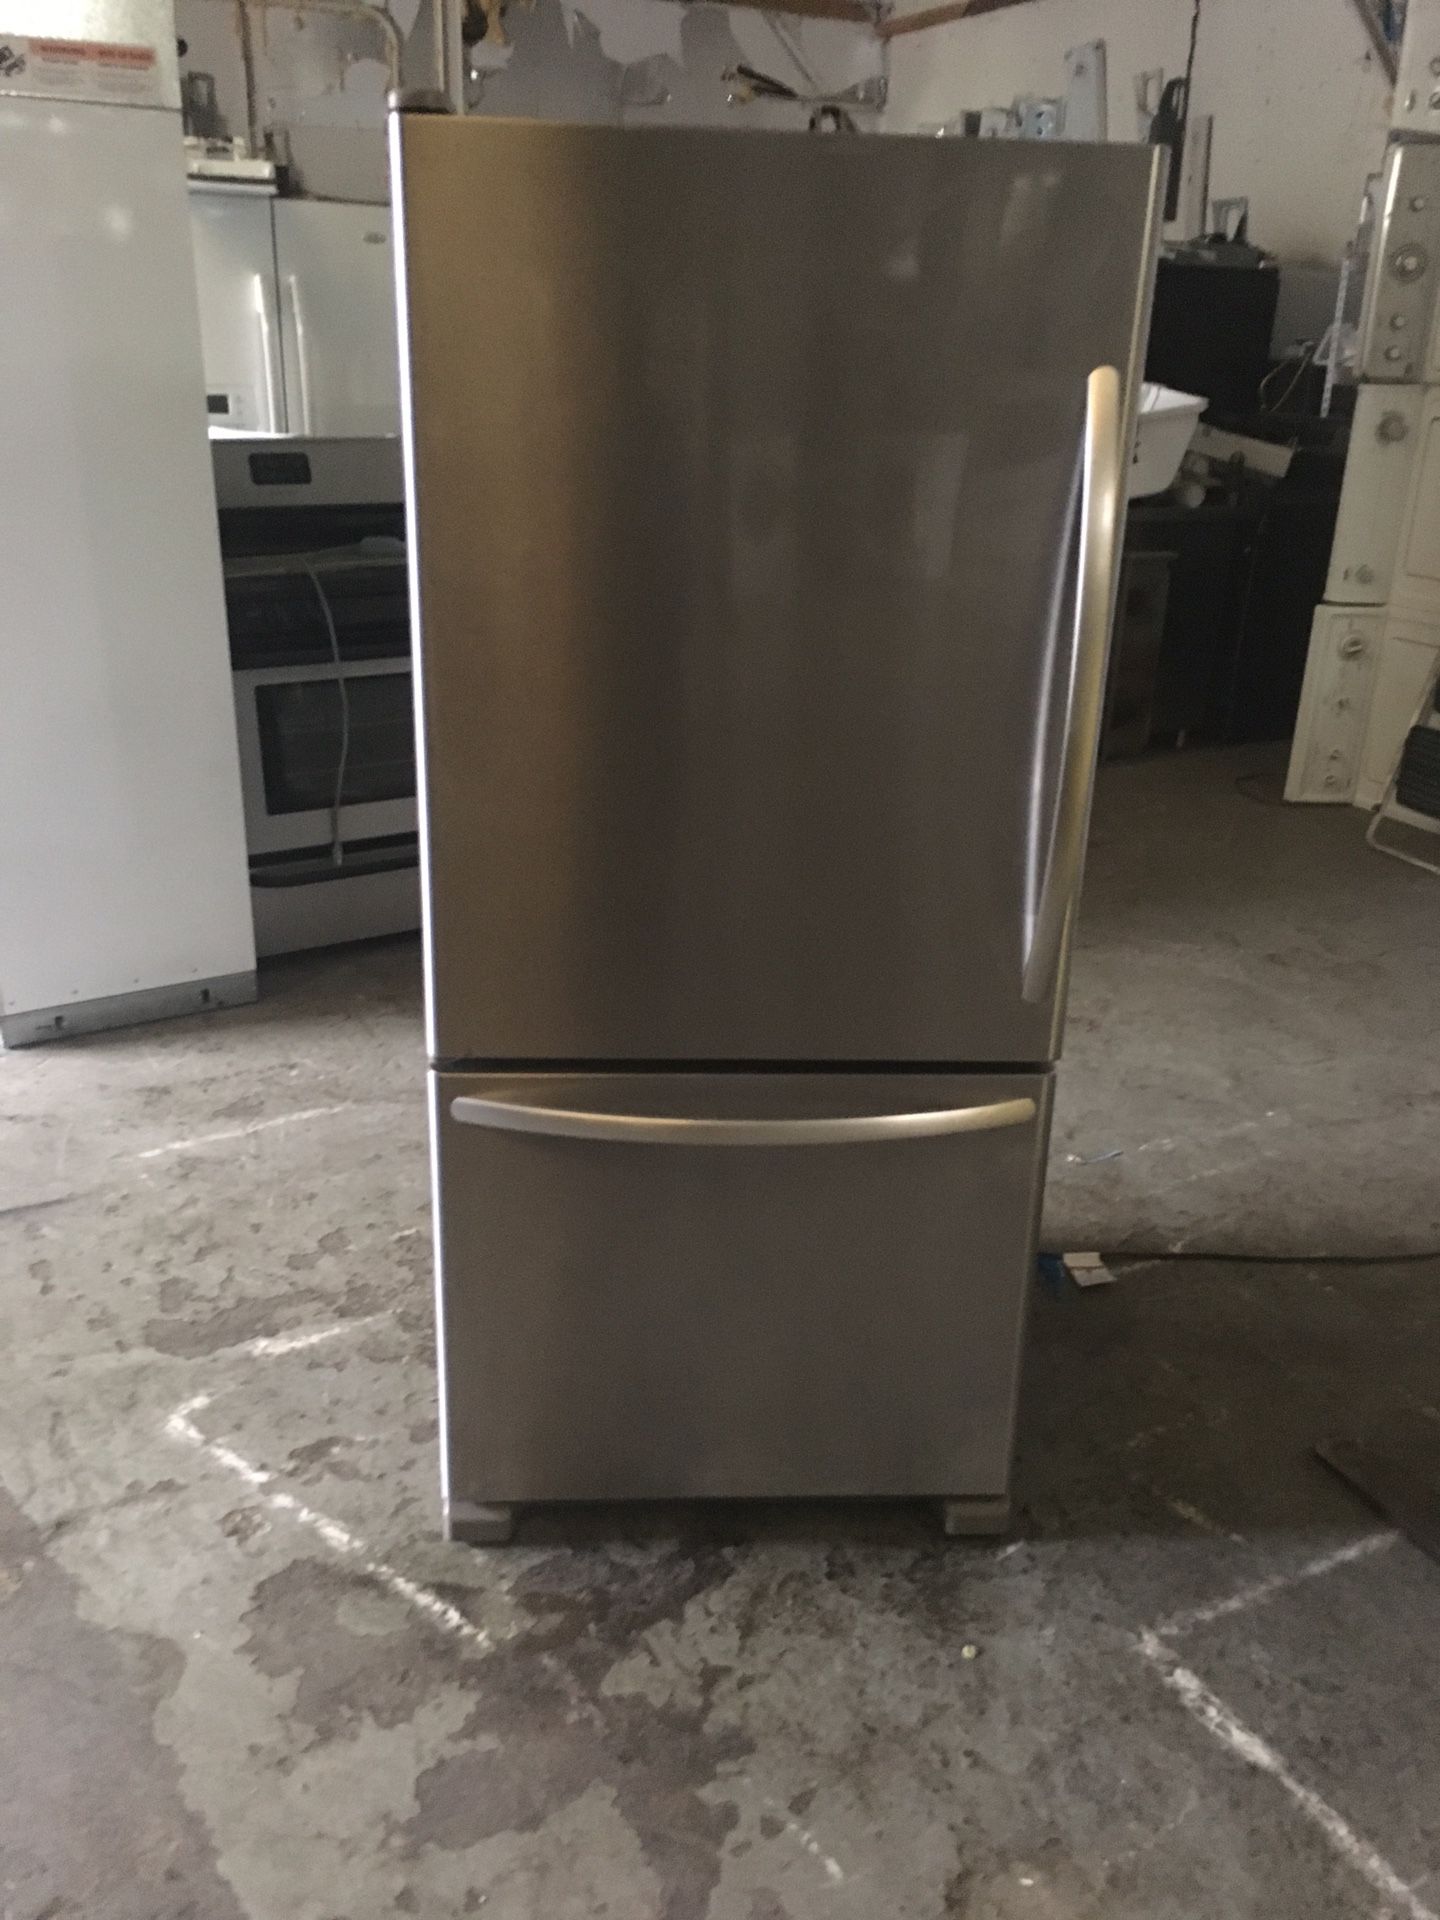 Refrigerator brand kitchen Aid everything is good working condition 90 days warranty delivery and installation